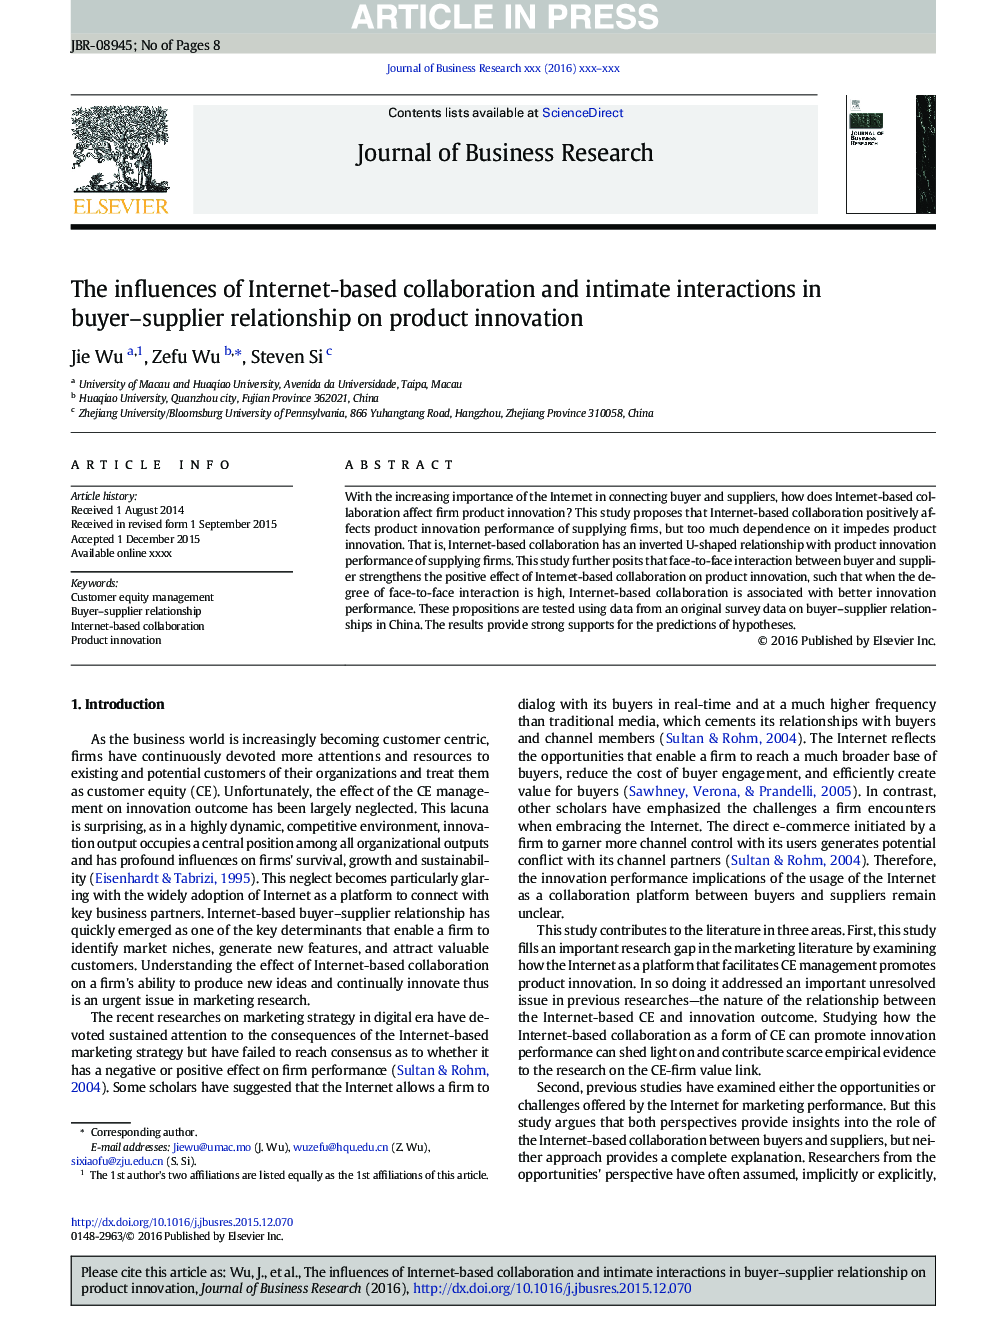 The influences of Internet-based collaboration and intimate interactions in buyer-supplier relationship on product innovation